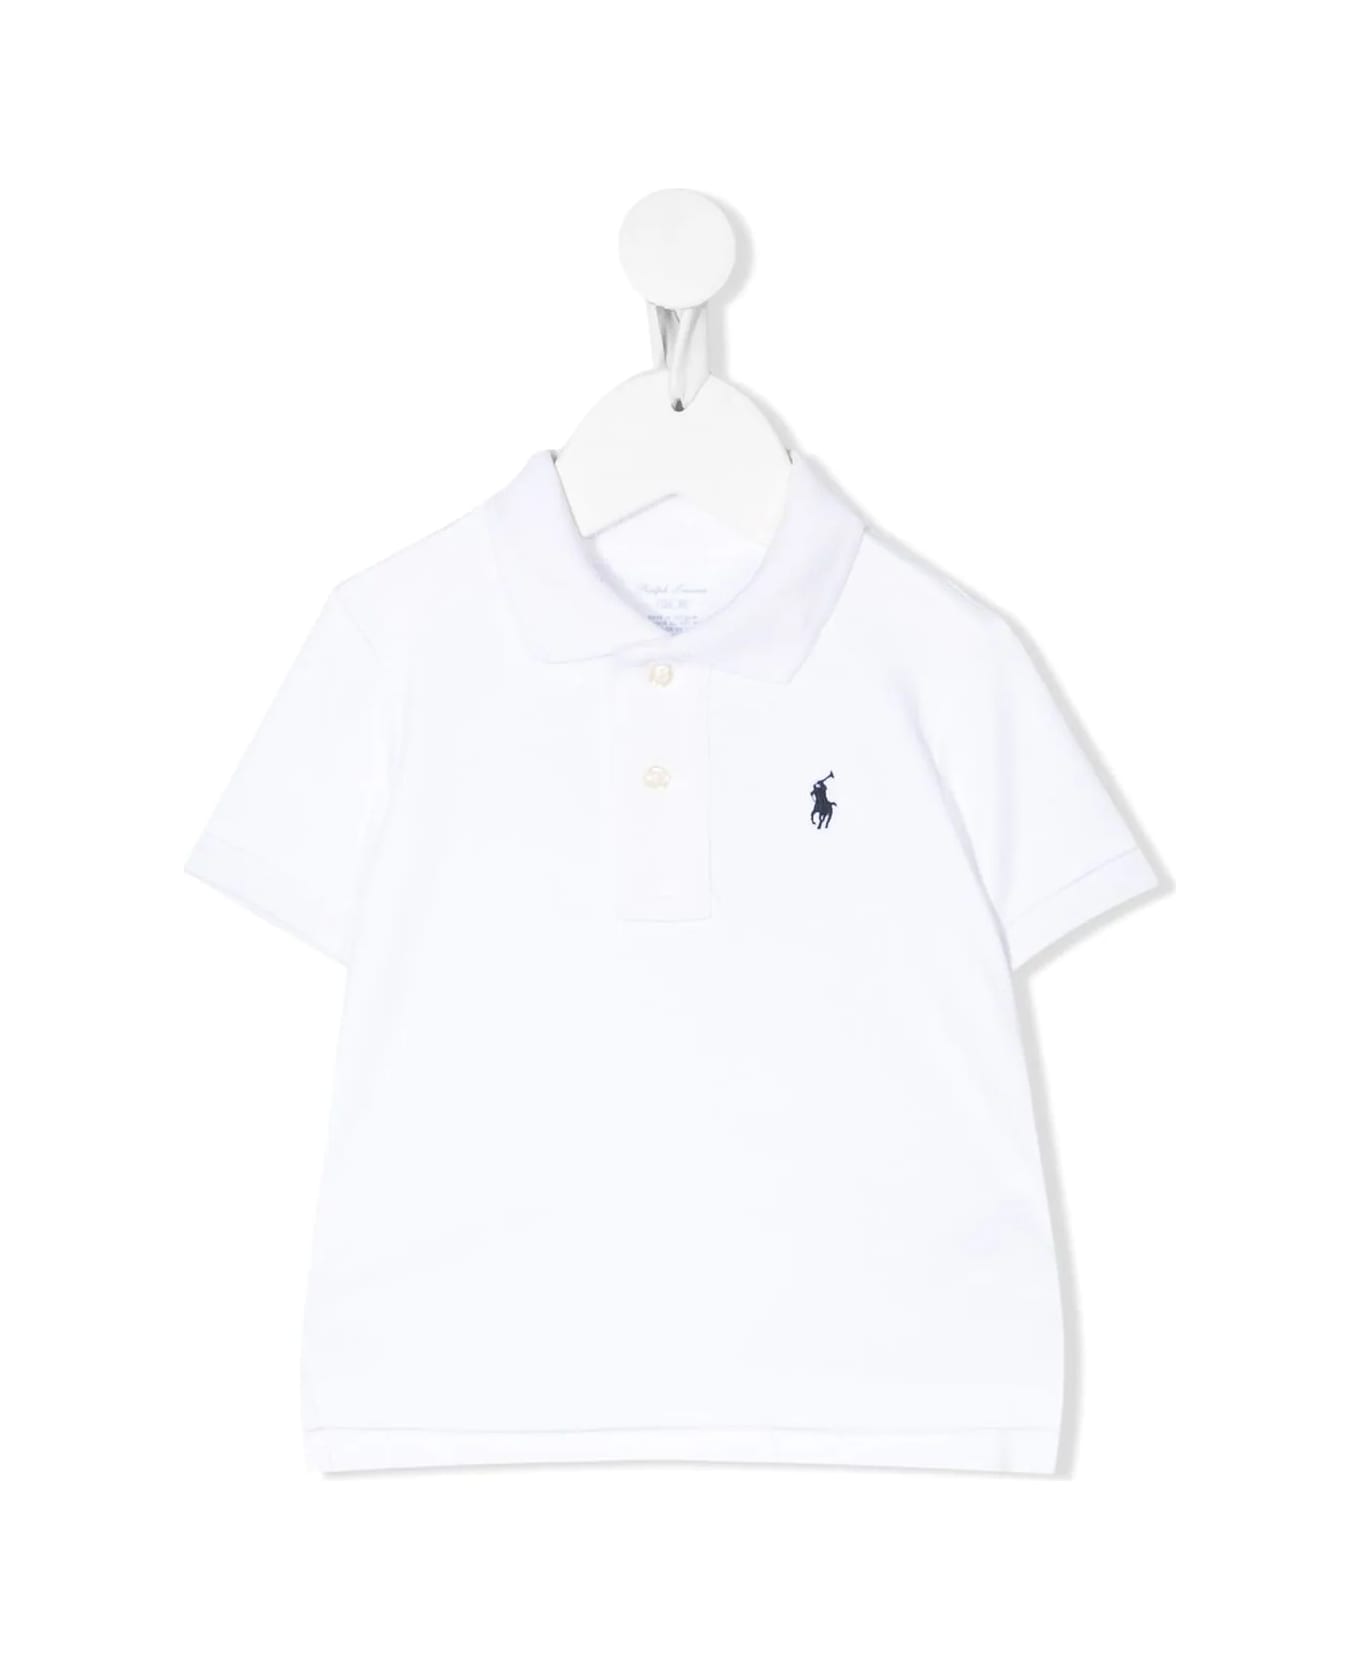 Ralph Lauren White Piquet Polo Shirt With Navy Blue Pony - White Tシャツ＆ポロシャツ